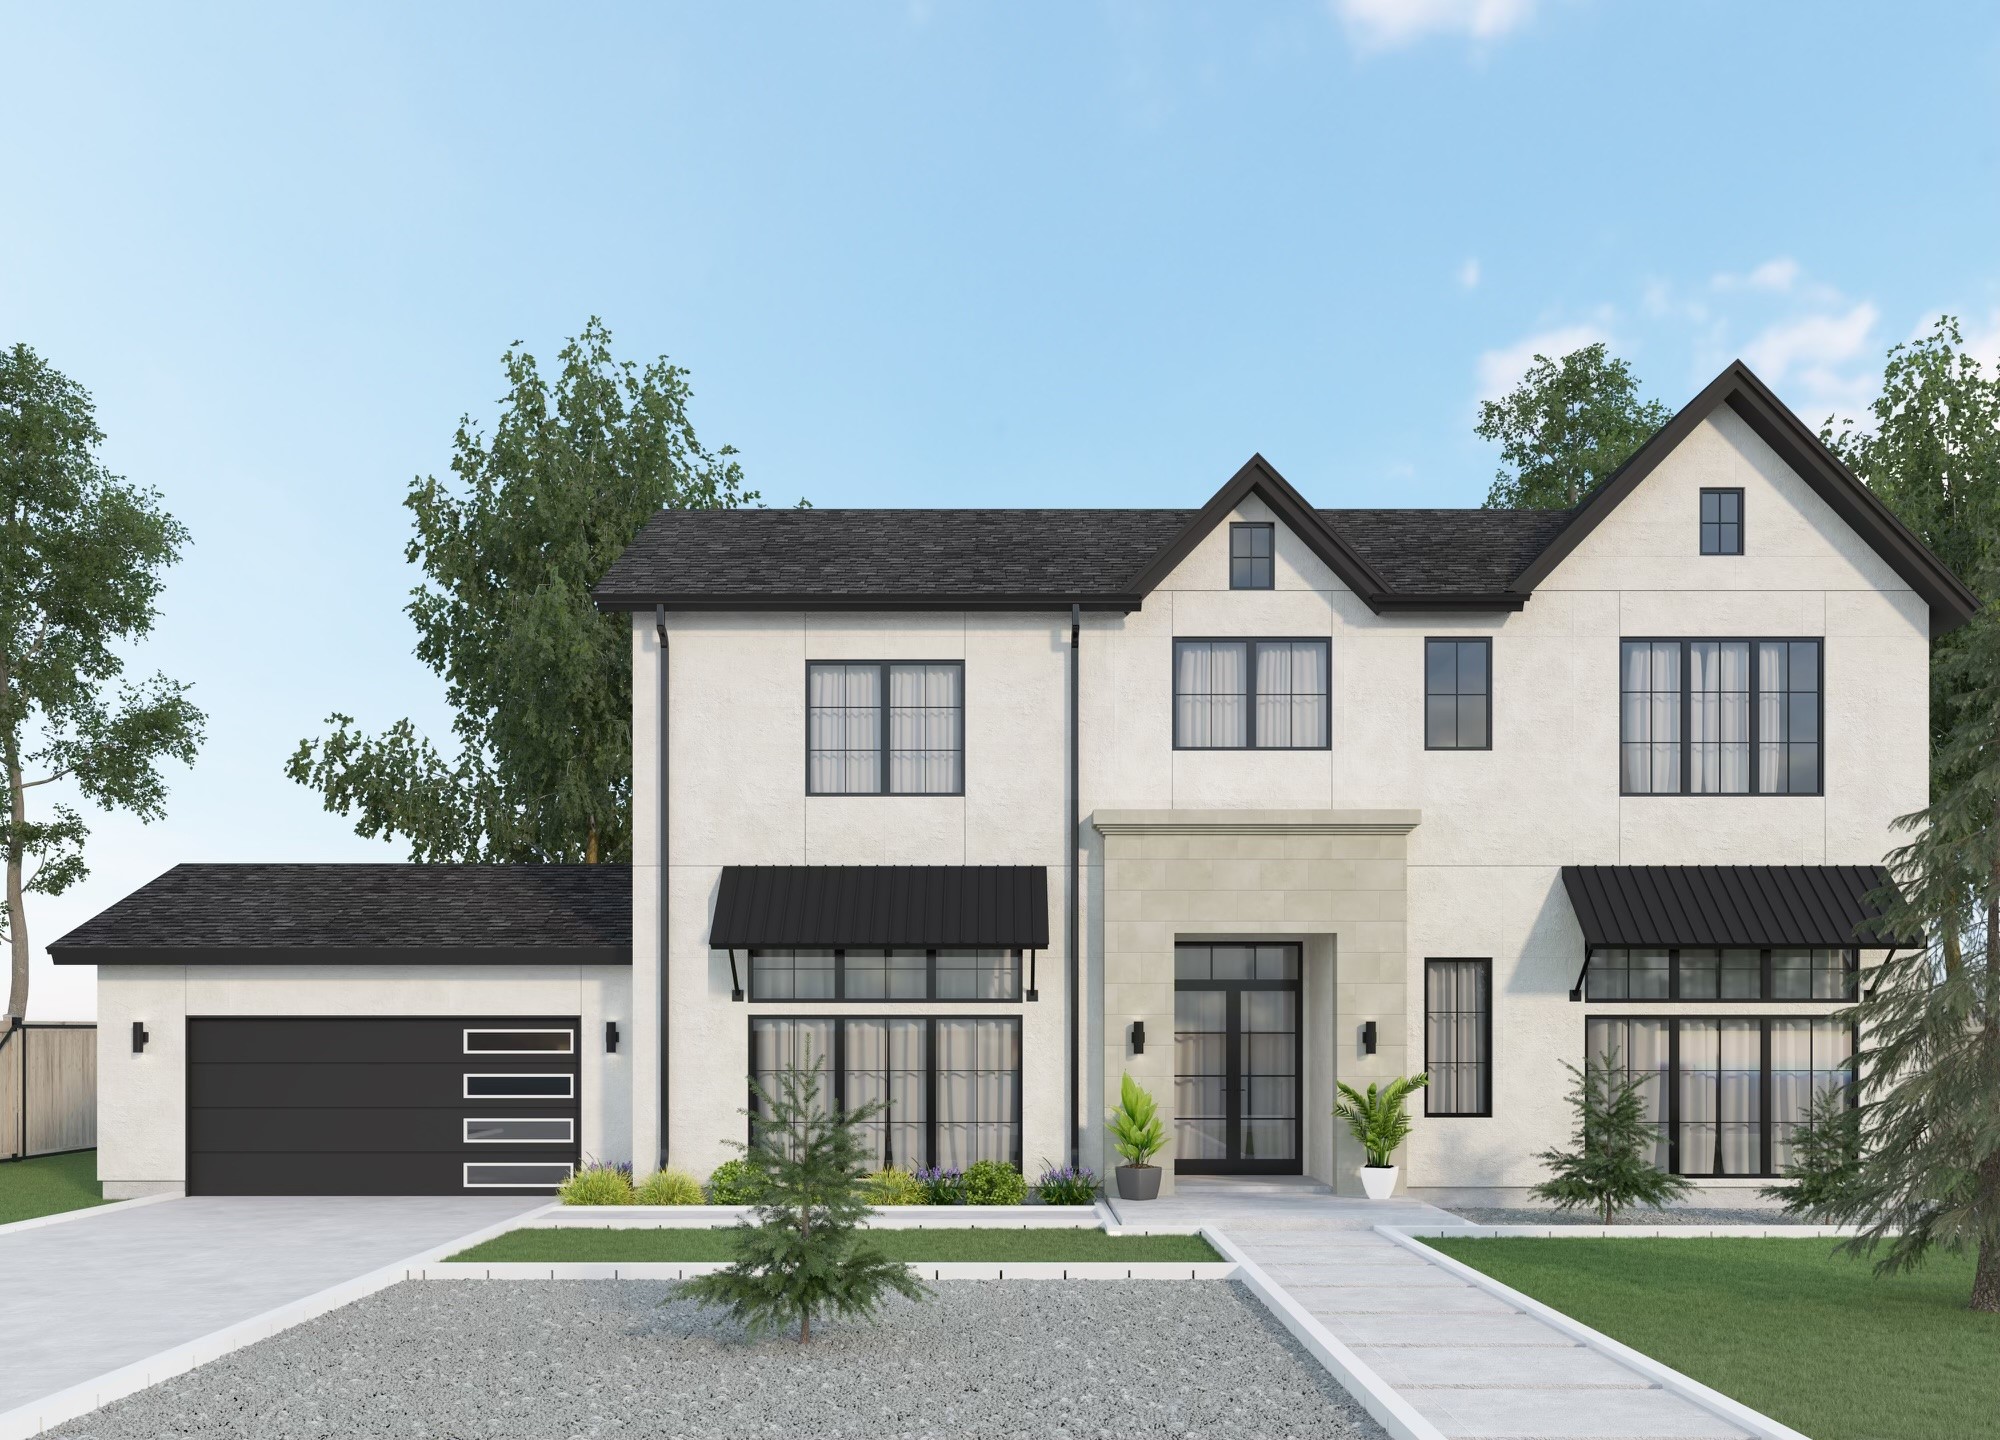 Welcome to this masterpiece of modern luxury in the prestigious Oak Estates neighborhood of River Oaks, Houston. This new construction home is the epitome of elegance and sophistication, offering 6451 square feet of living space on a spacious 11,200 square foot lot.

*Note, this image is a rendering